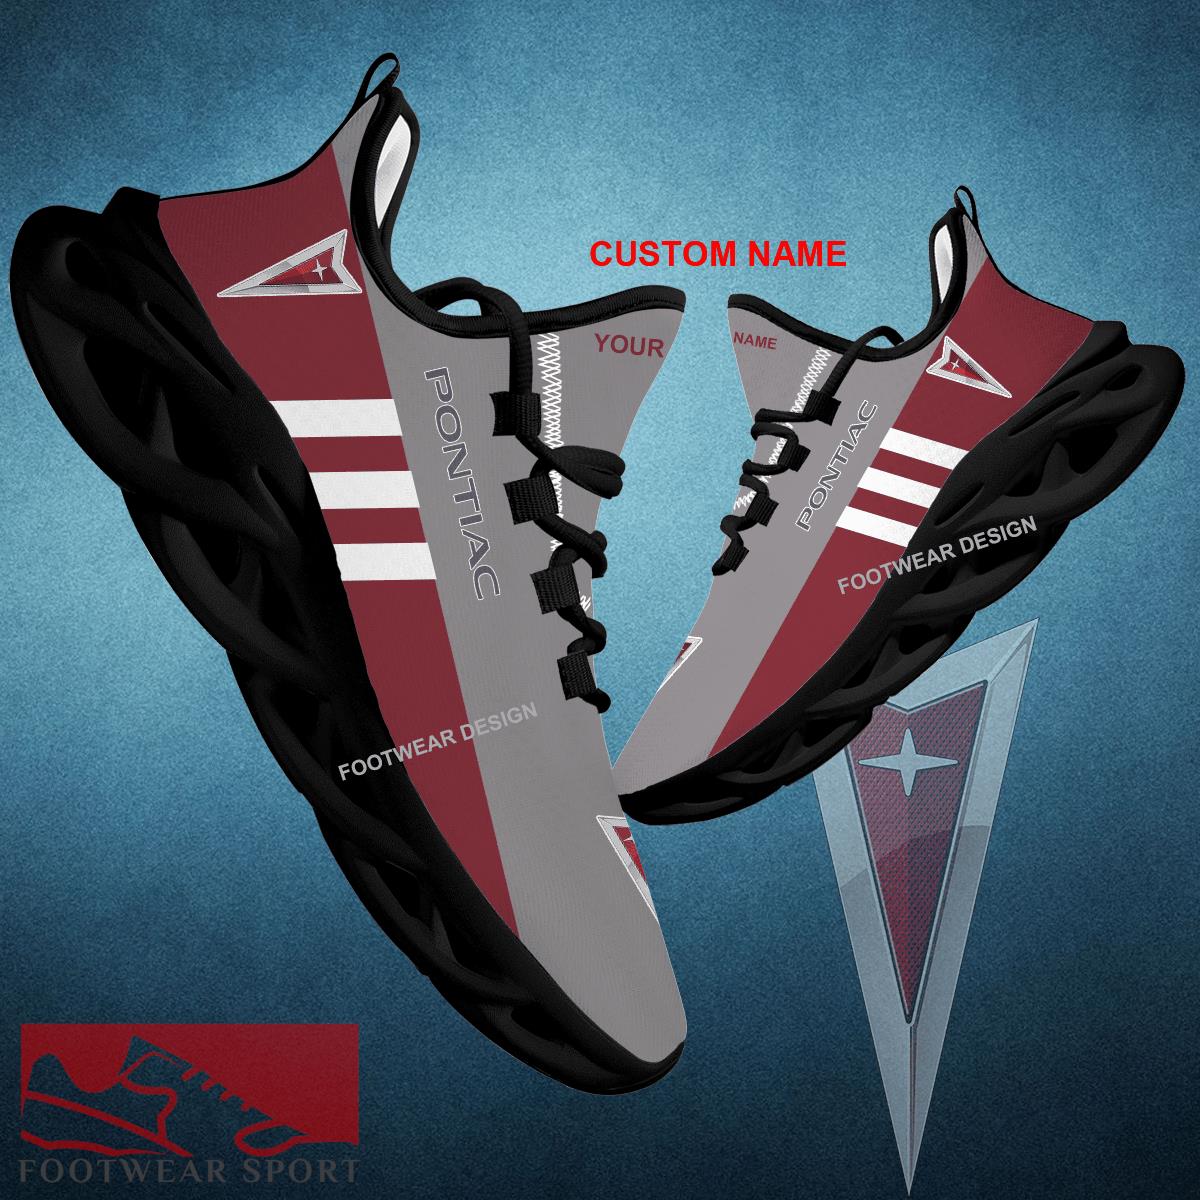 Car Racing Pontiac Style Chunky Shoes New Design Gift Fans Max Soul Sneakers Personalized - Car Racing Pontiac Logo New Style Chunky Shoes Photo 1